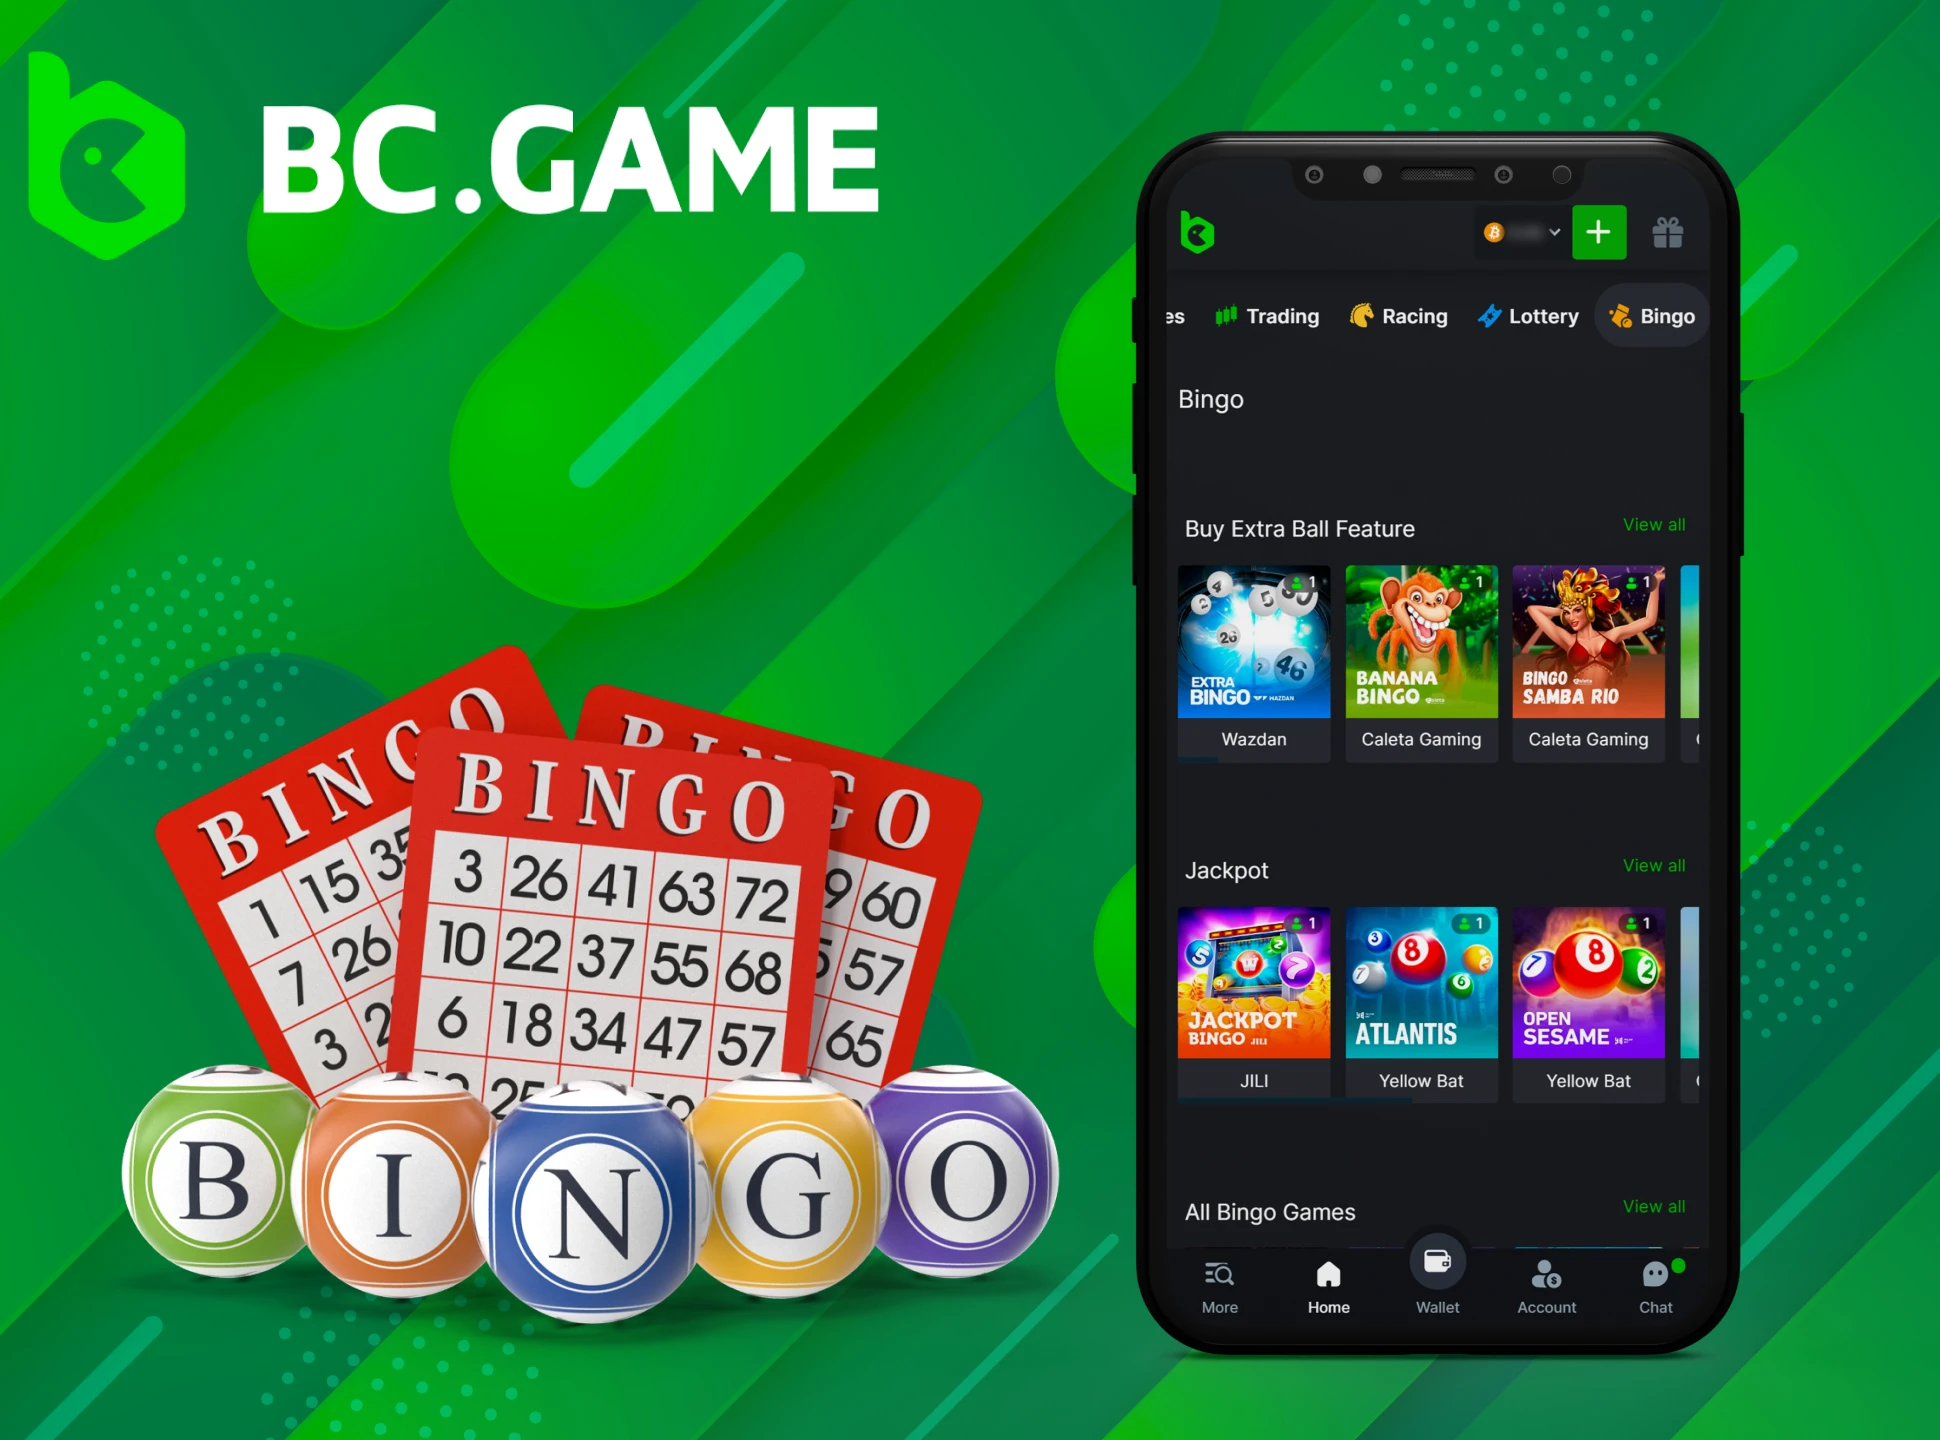 If you are a Bingo lover, try playing on the BC Game app.